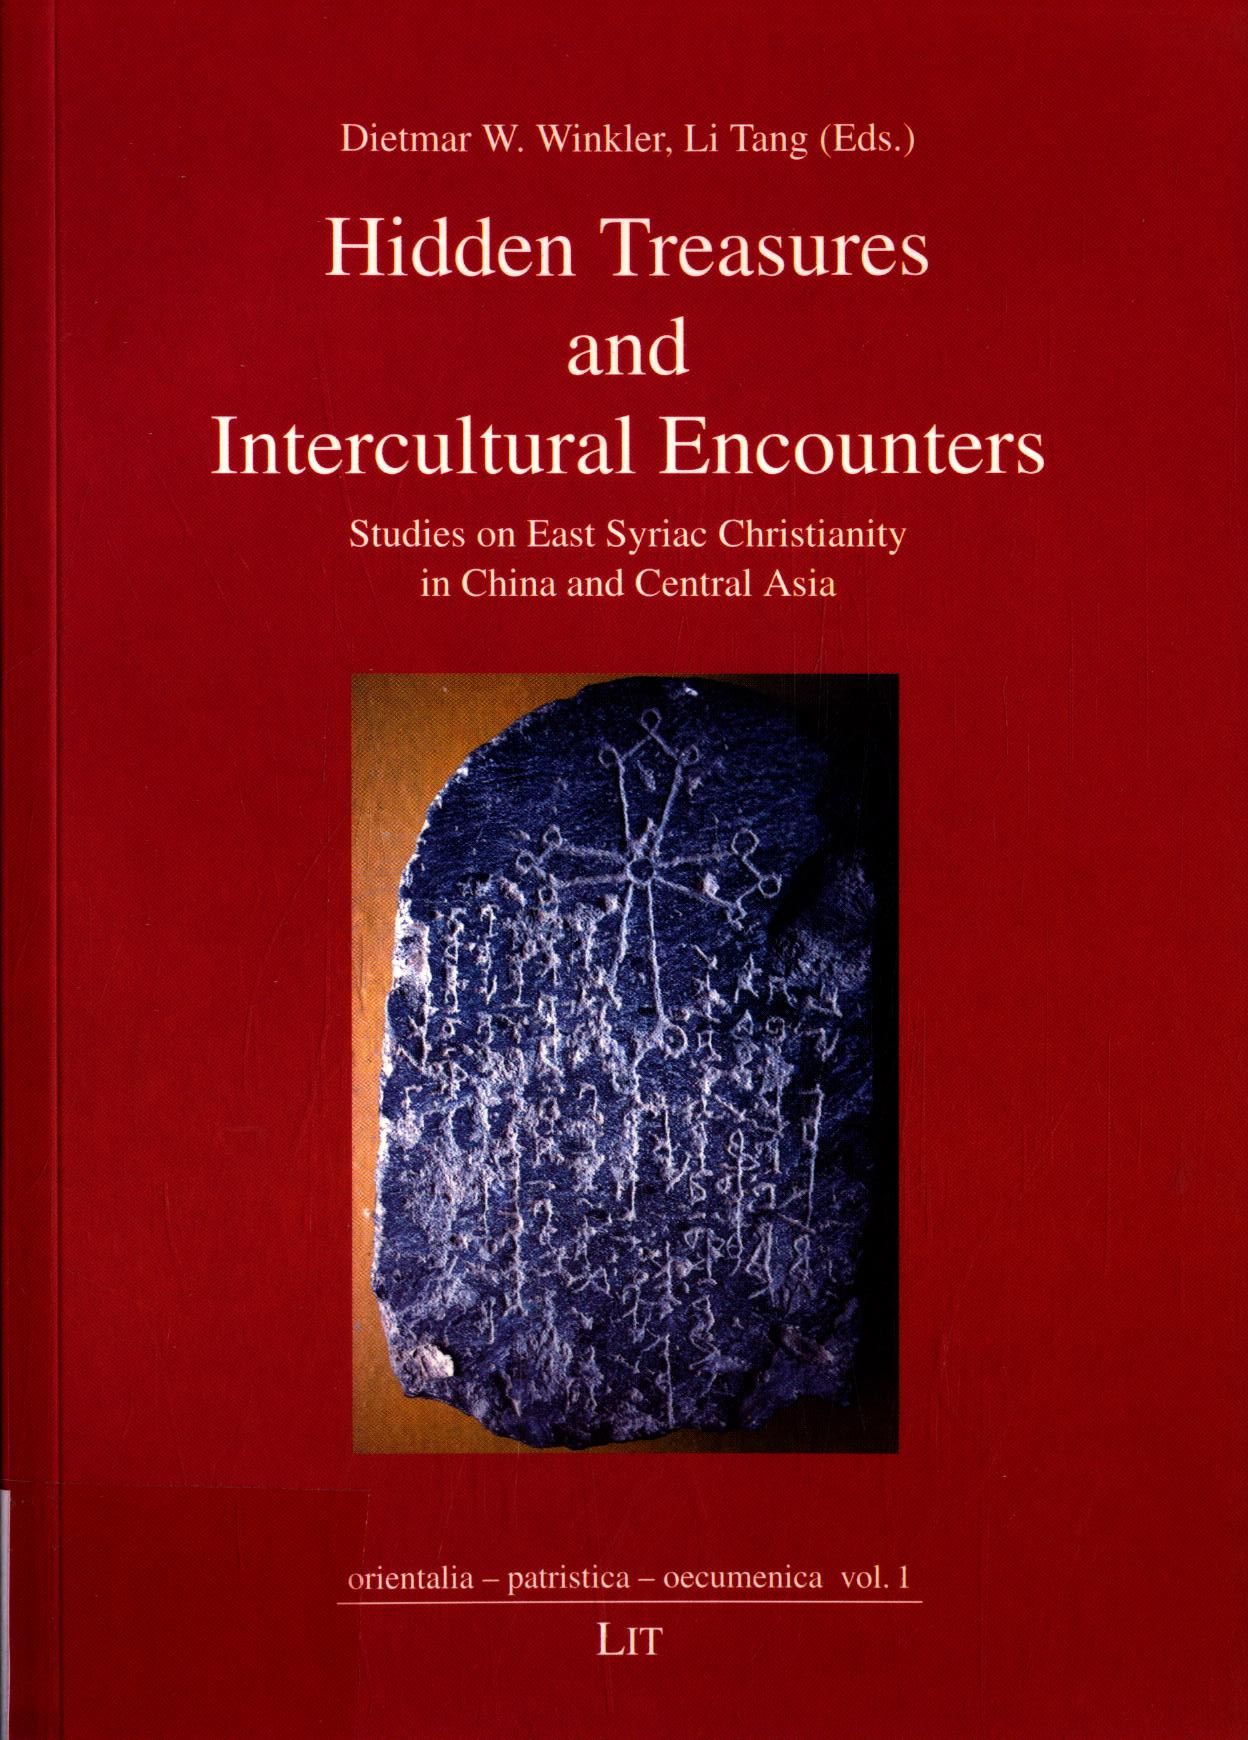 Hidden Treasures and Intercultural Encounters: Studies on East Syriac Christianity in China and Central Asia Band 1 - Winkler, Dietmar W und Li Tang